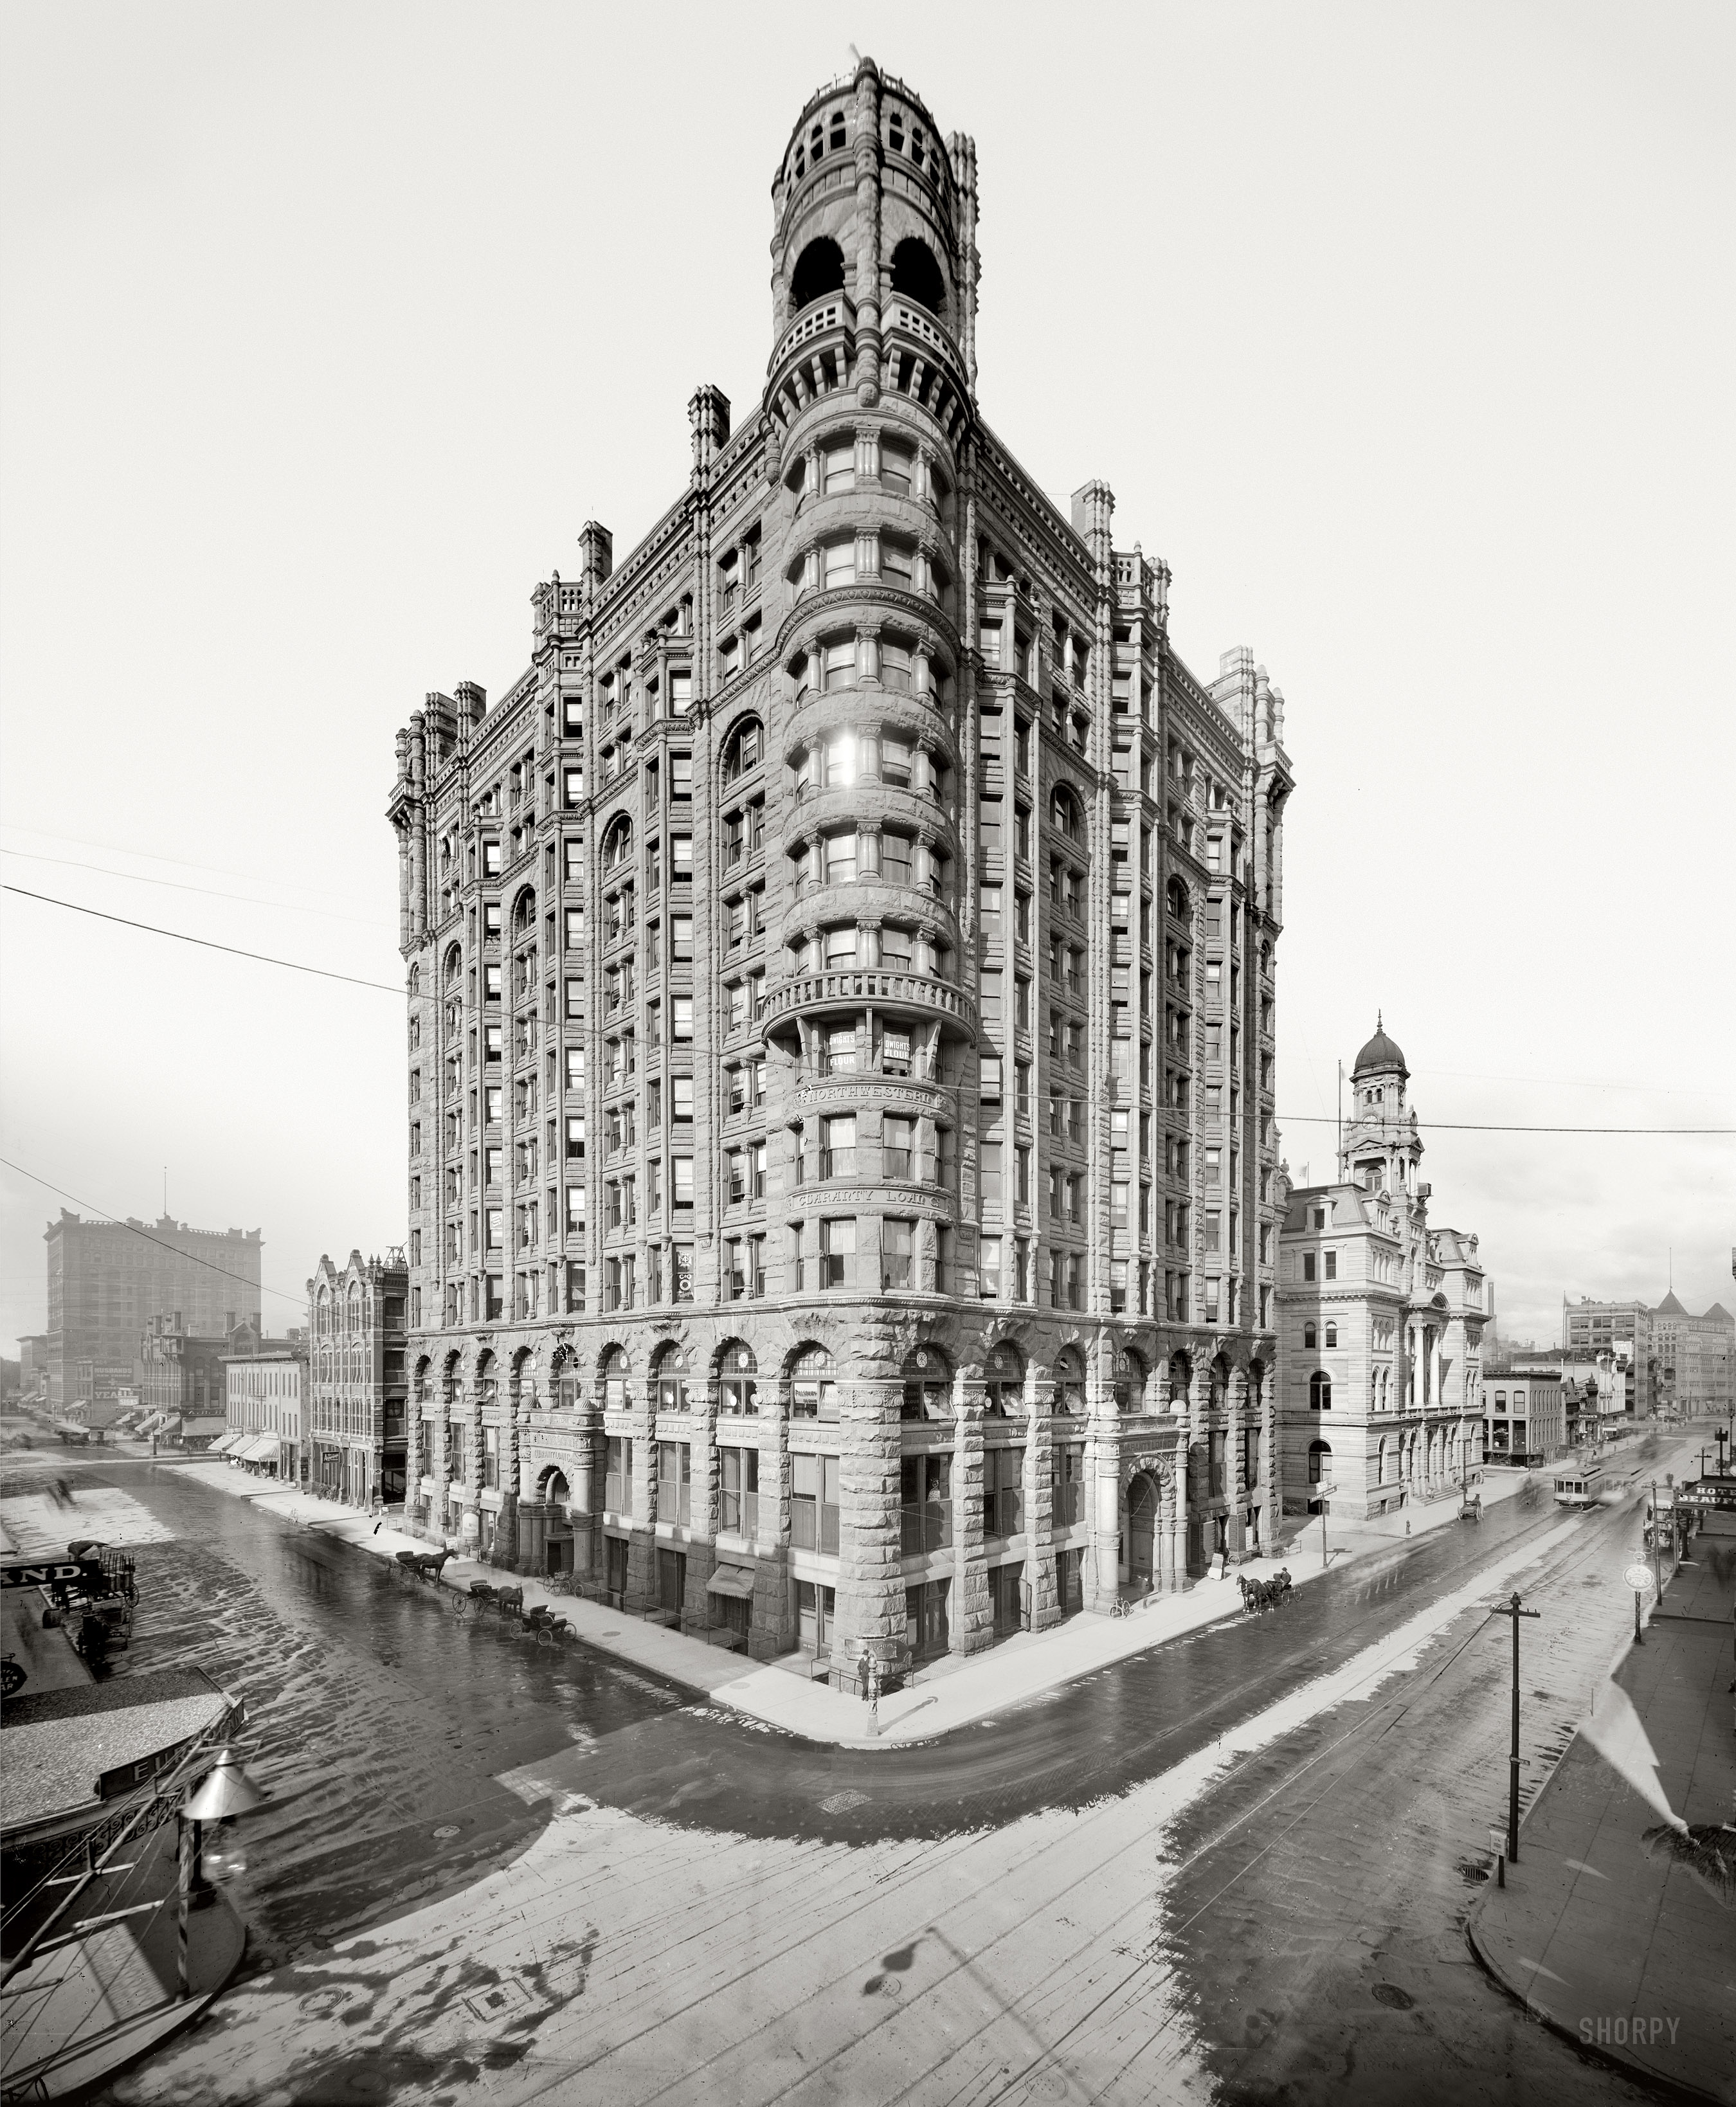 Minneapolis, Minnesota, circa 1905. "Northwestern Guaranty Loan Building." Note the newfangled "horseless carriage" parked at the curb. 8x10 inch dry plate glass negative, Detroit Publishing Company. View full size.